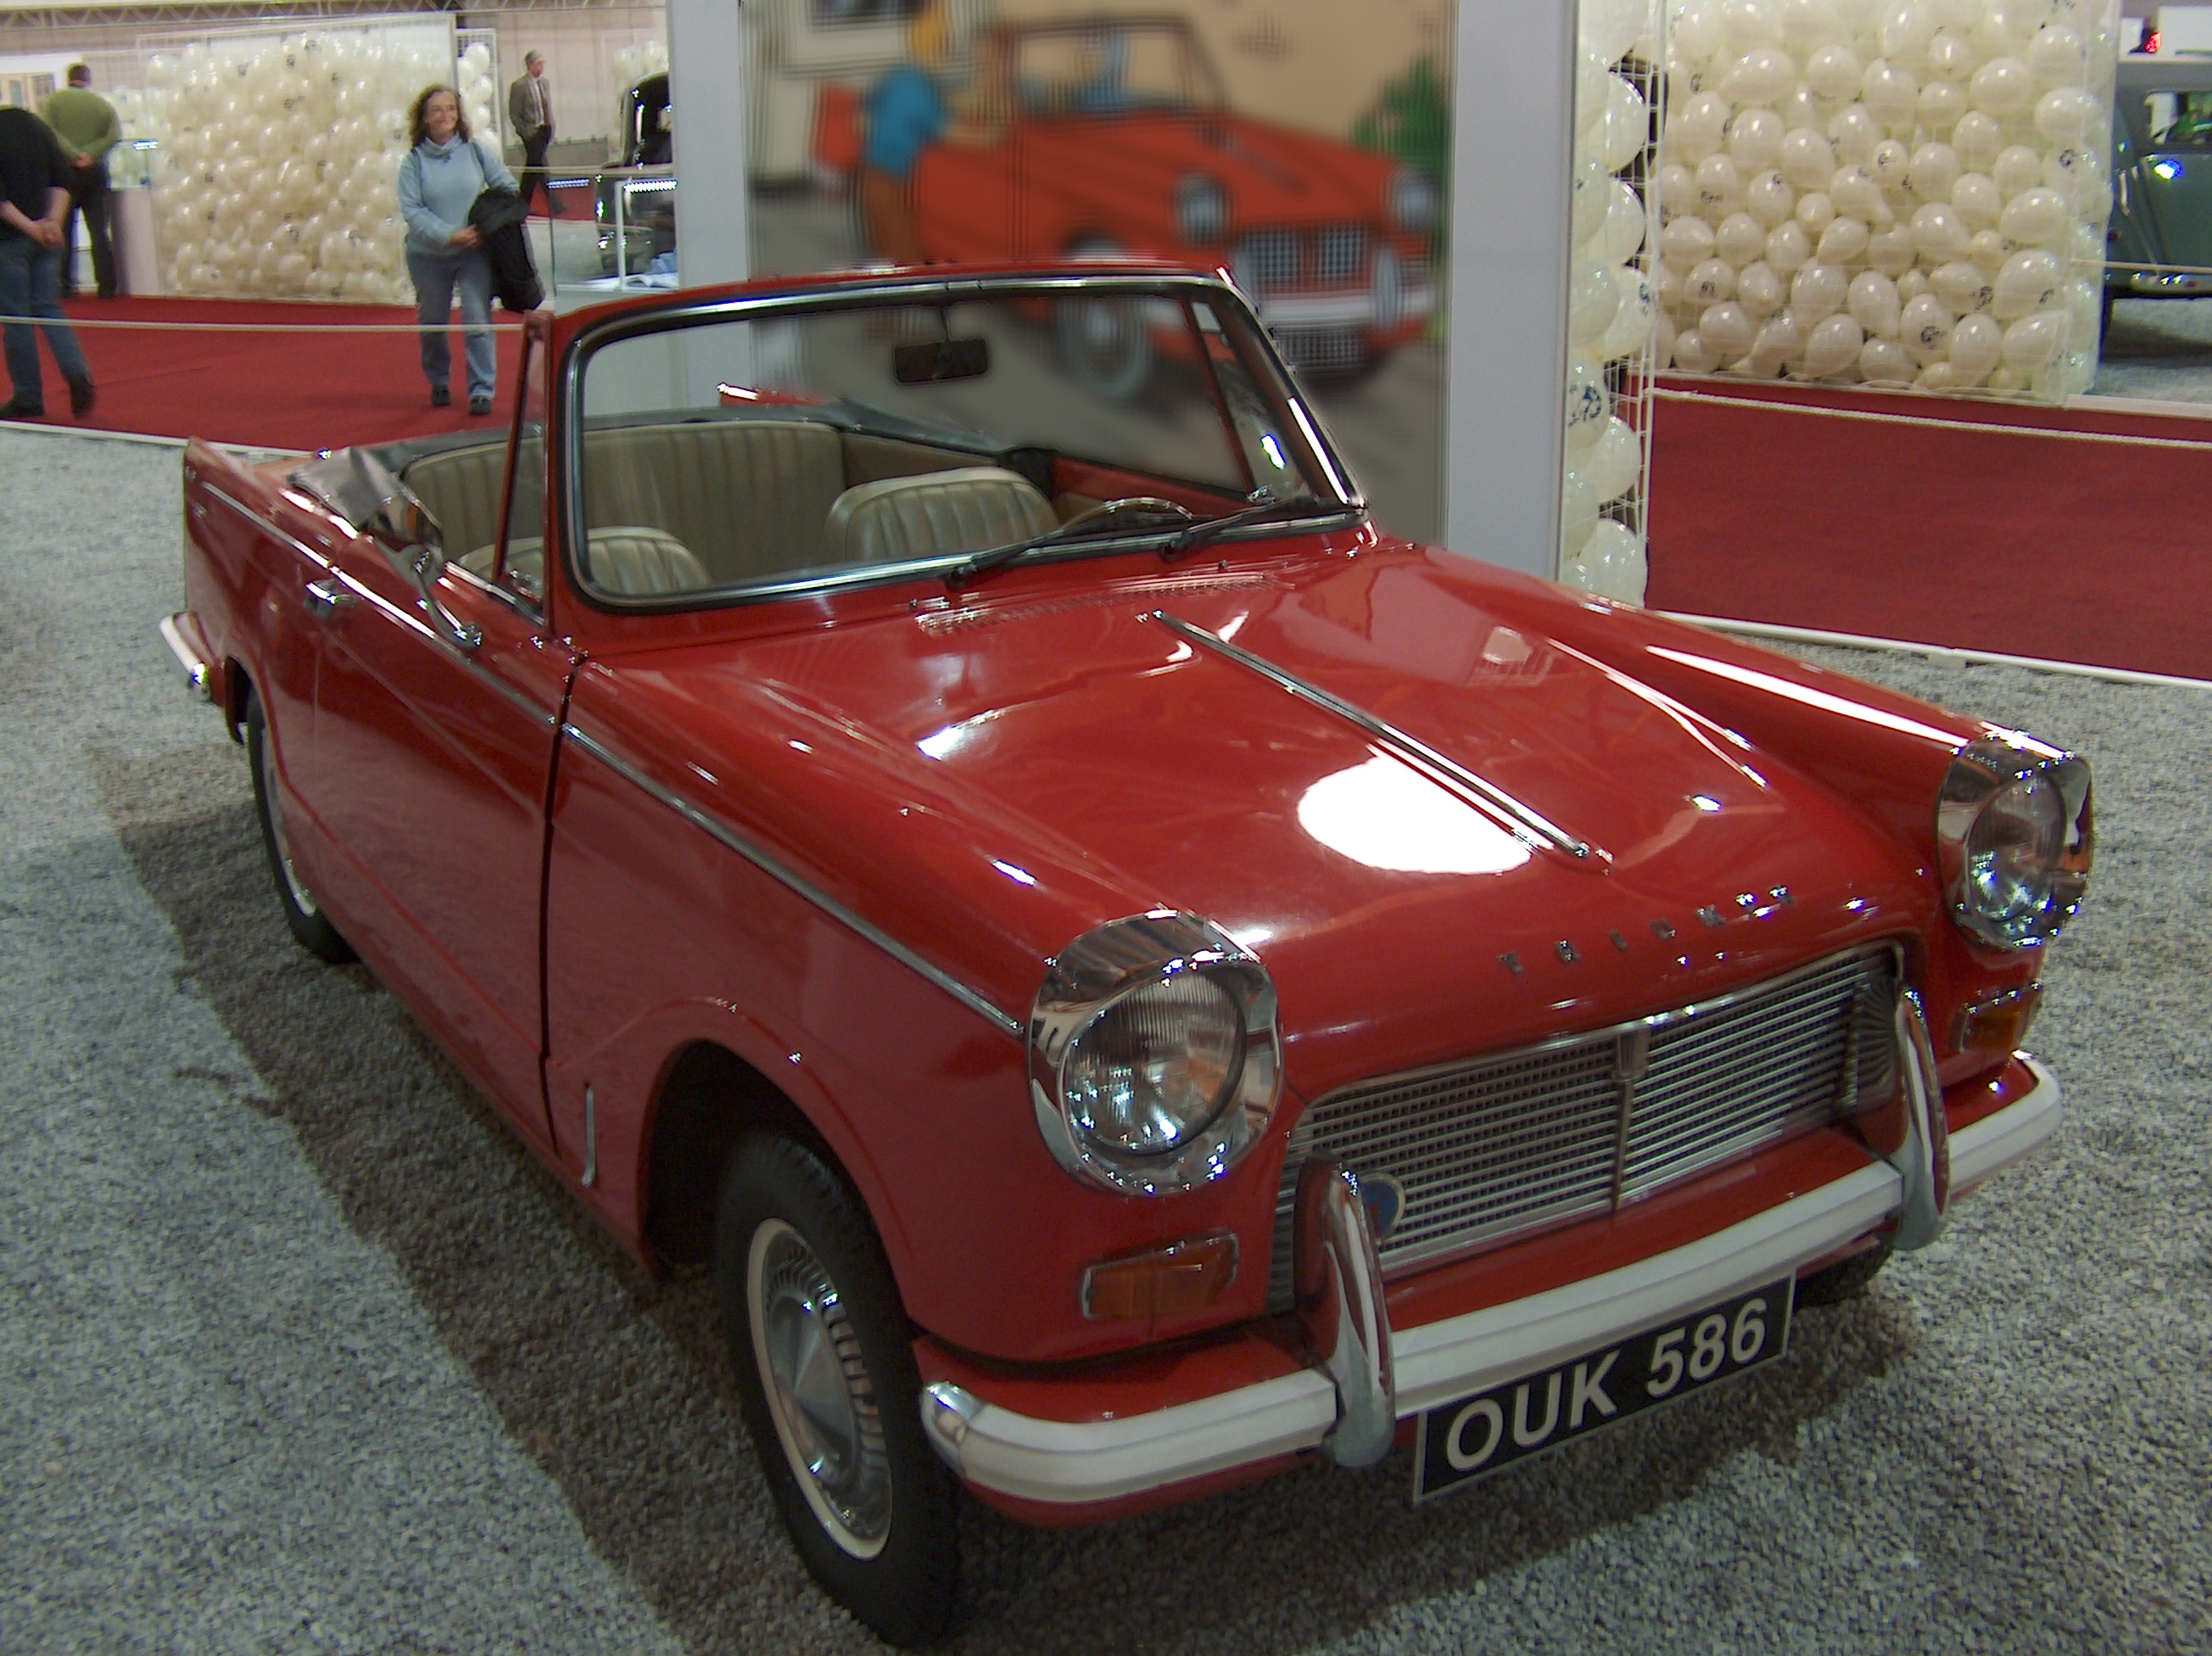 List of options and versions by Triumph herald. Triumph herald ...